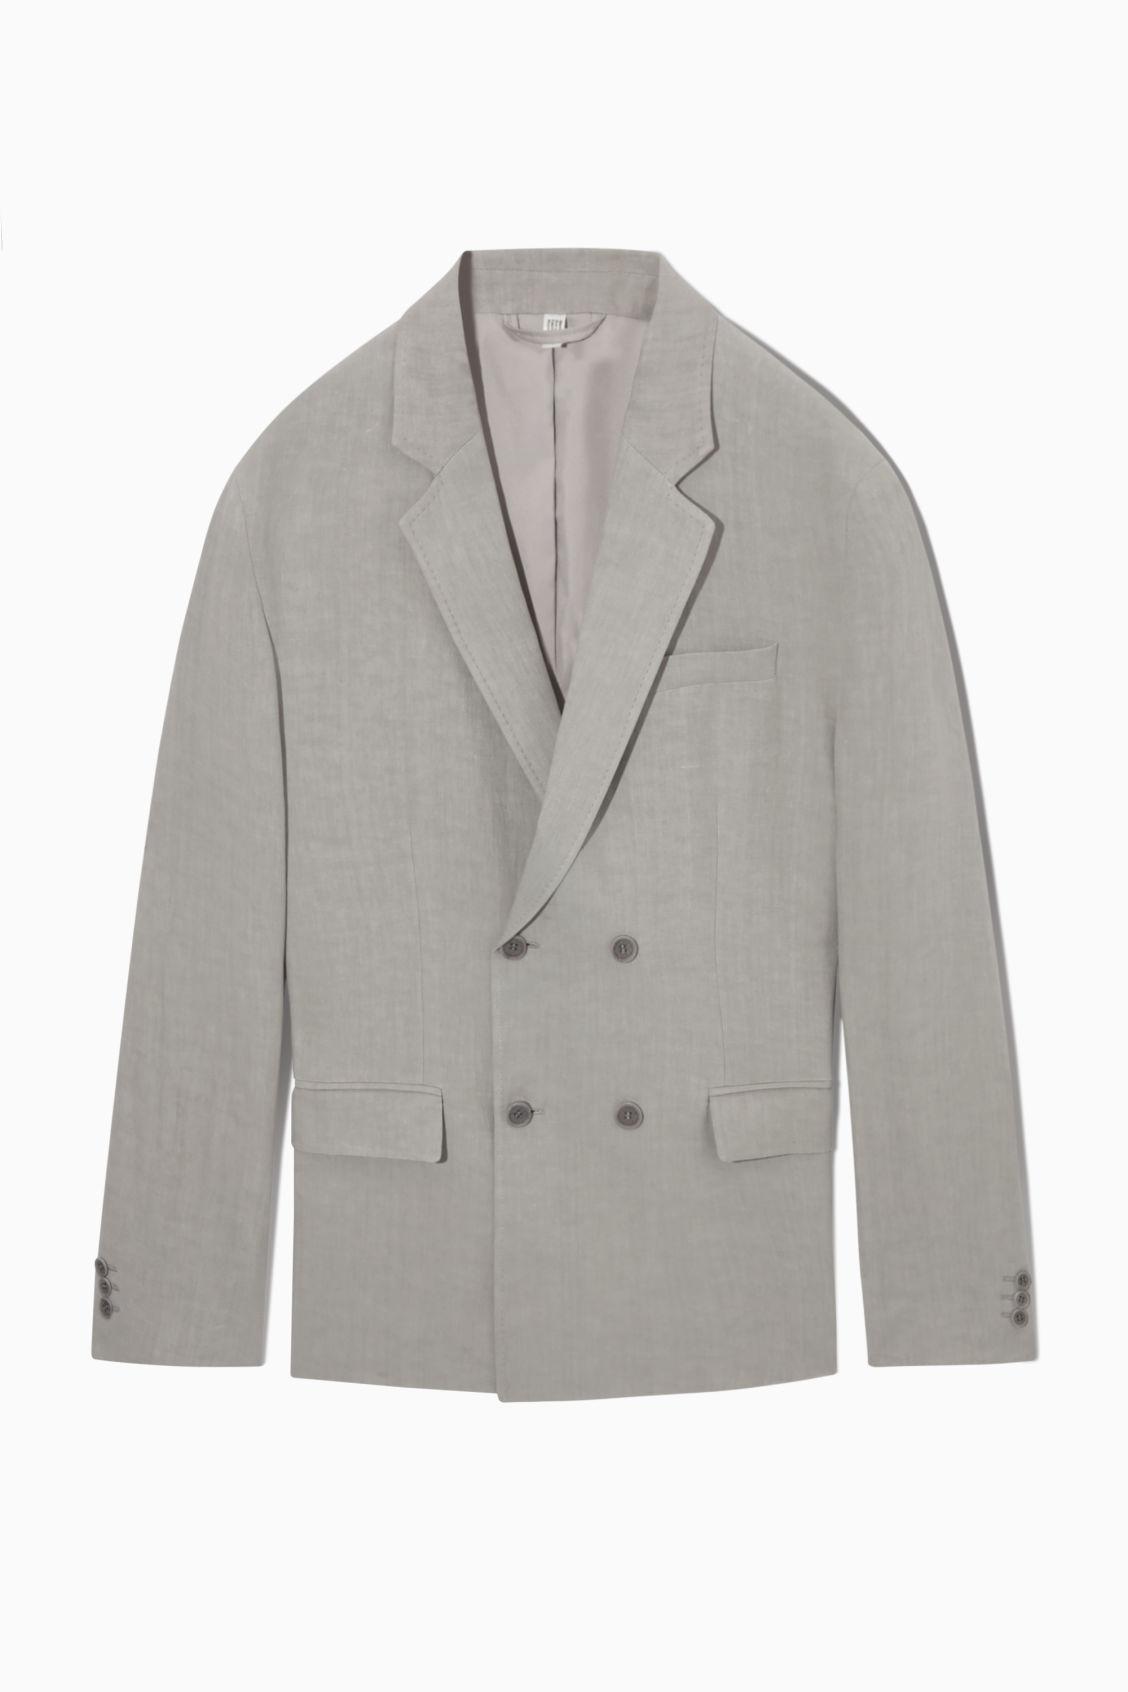 COS Regular-fit Double-breasted Linen Blazer in Gray for Men | Lyst